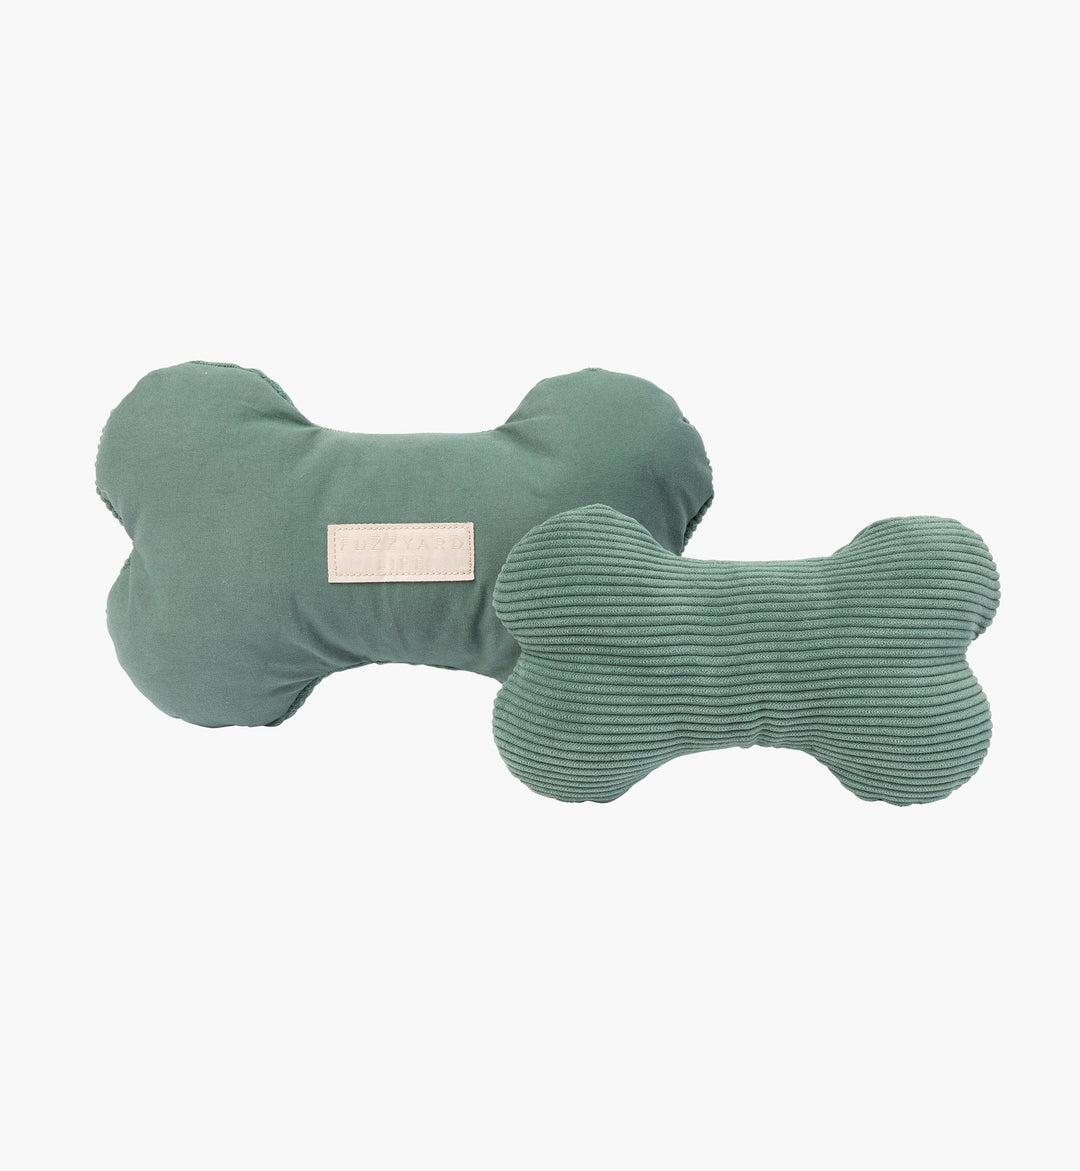 Plush Bone Dog Toy in Myrtle Green: Dual-Sided Soft & Cuddly Toy with Squeaker!